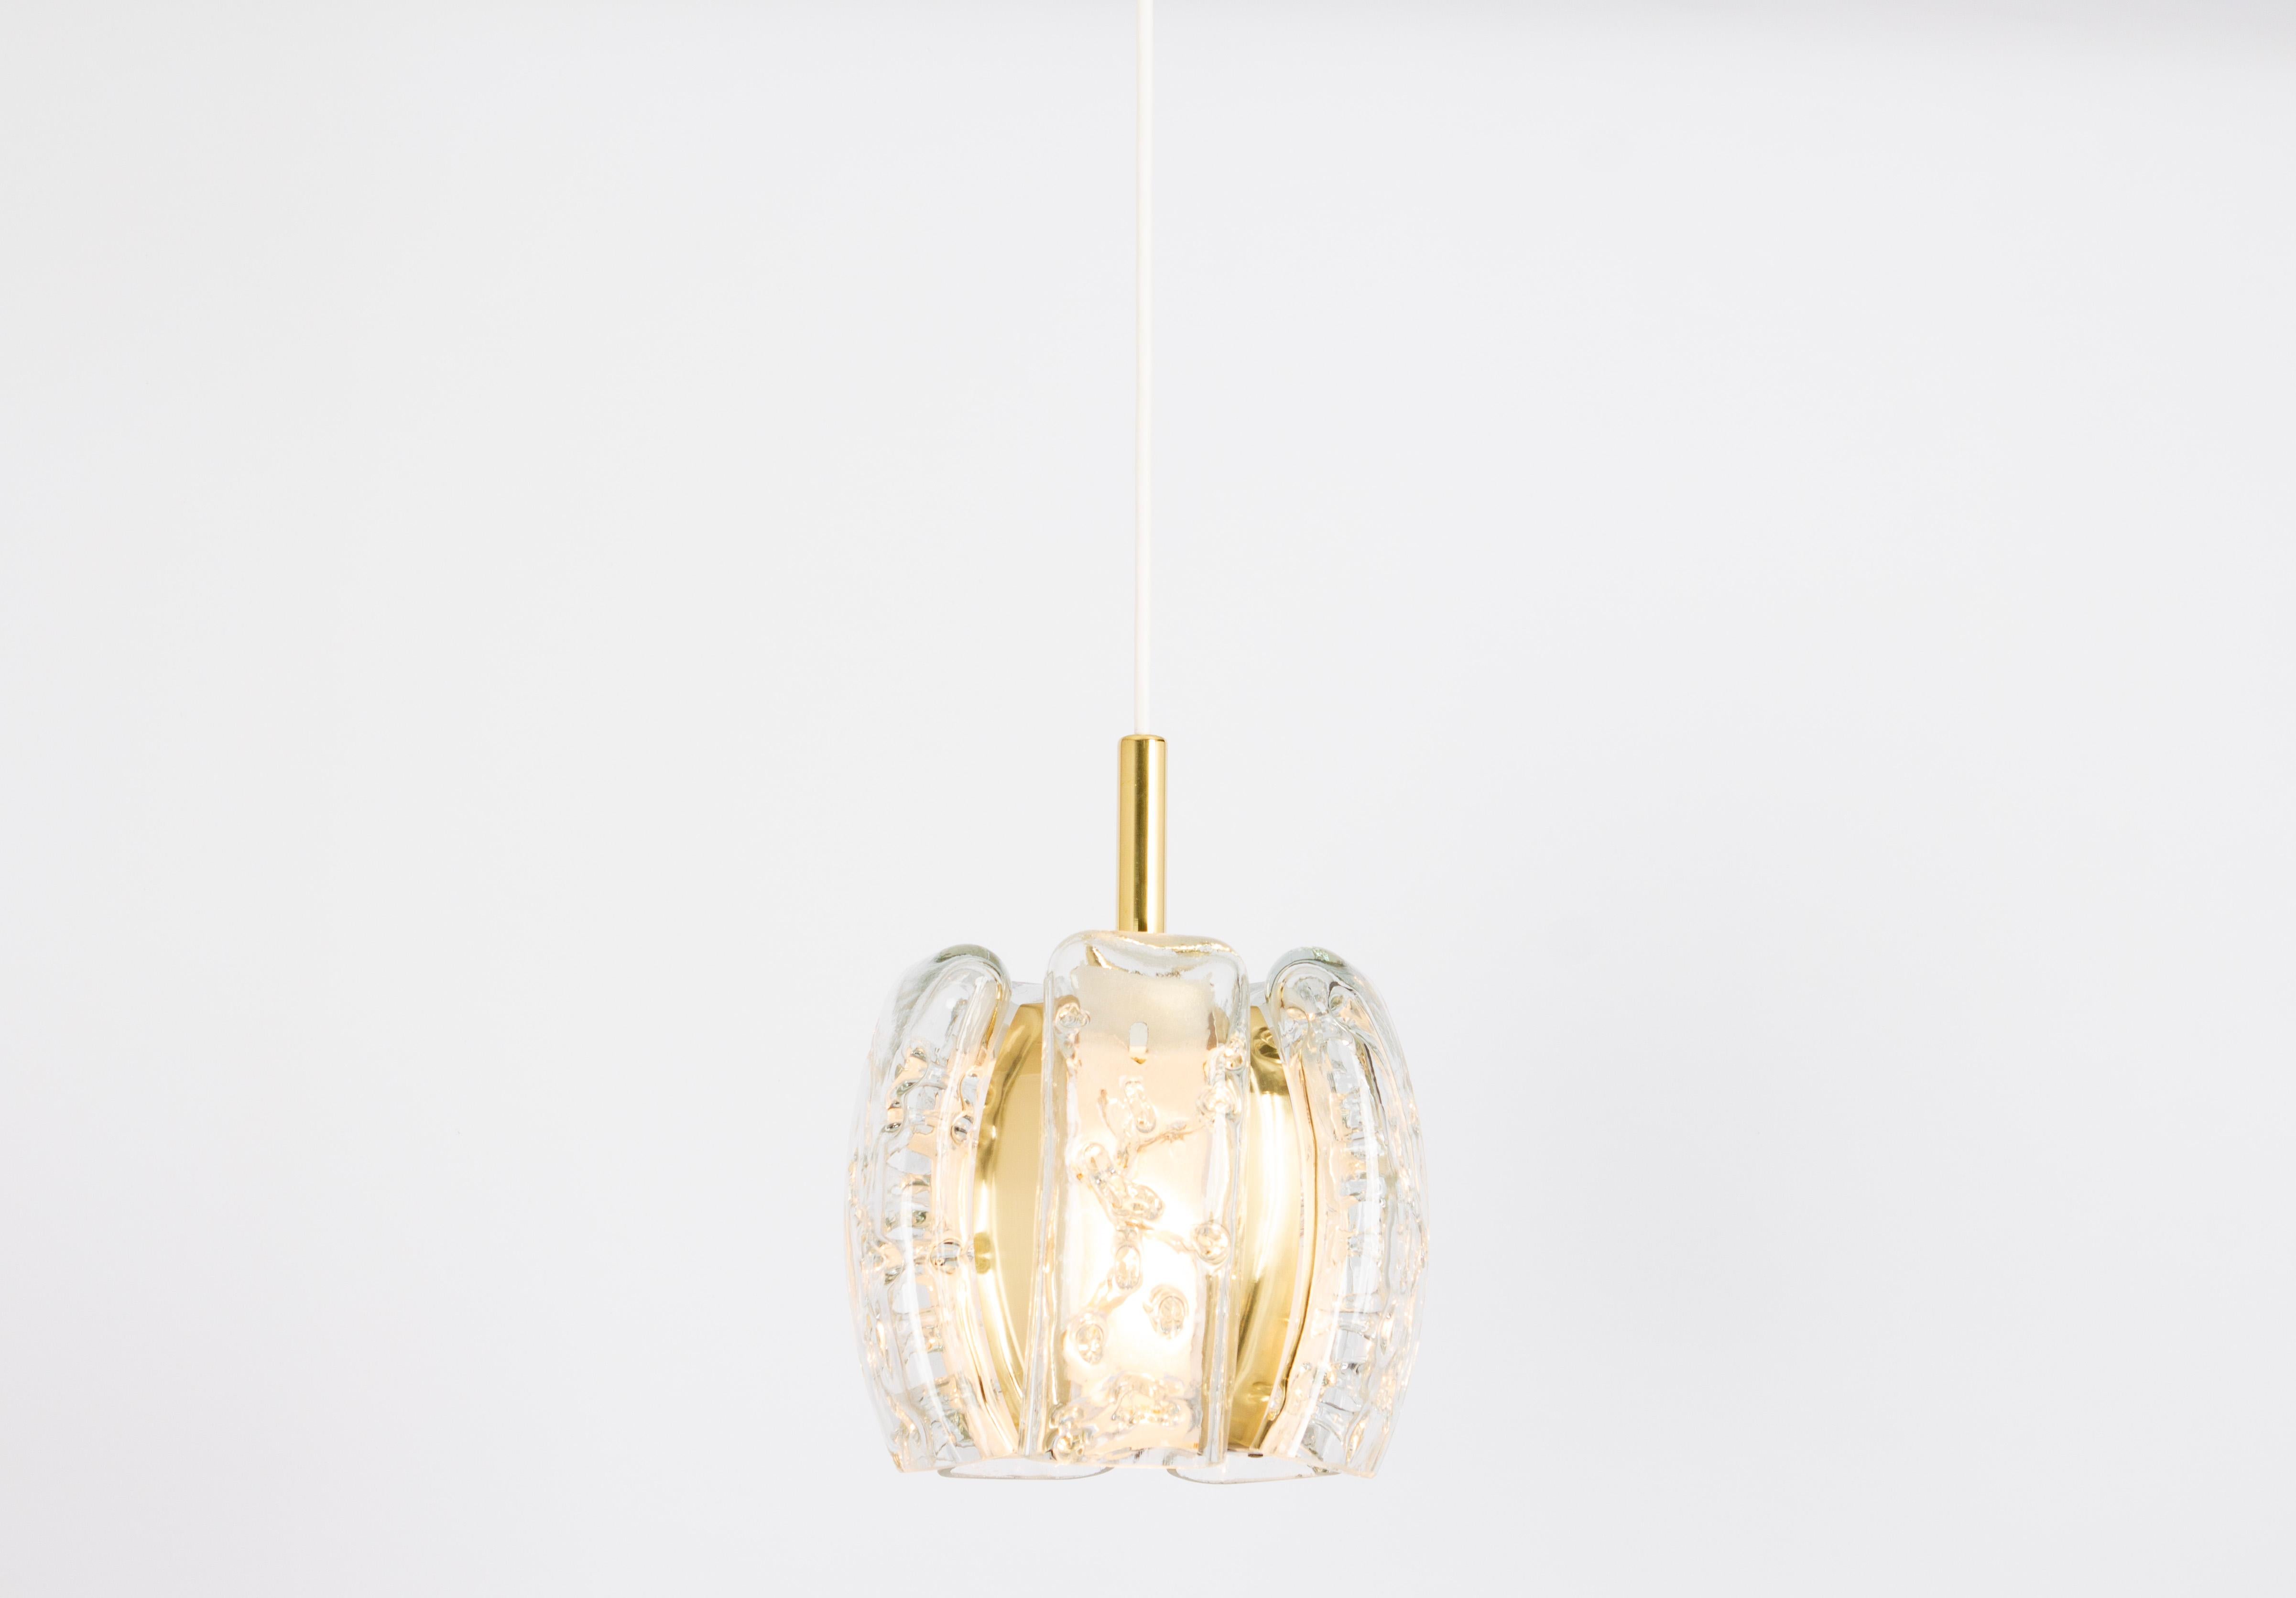 1 of 6 Petite Murano Tubes Pendant Lights by Doria, 1970s For Sale 1